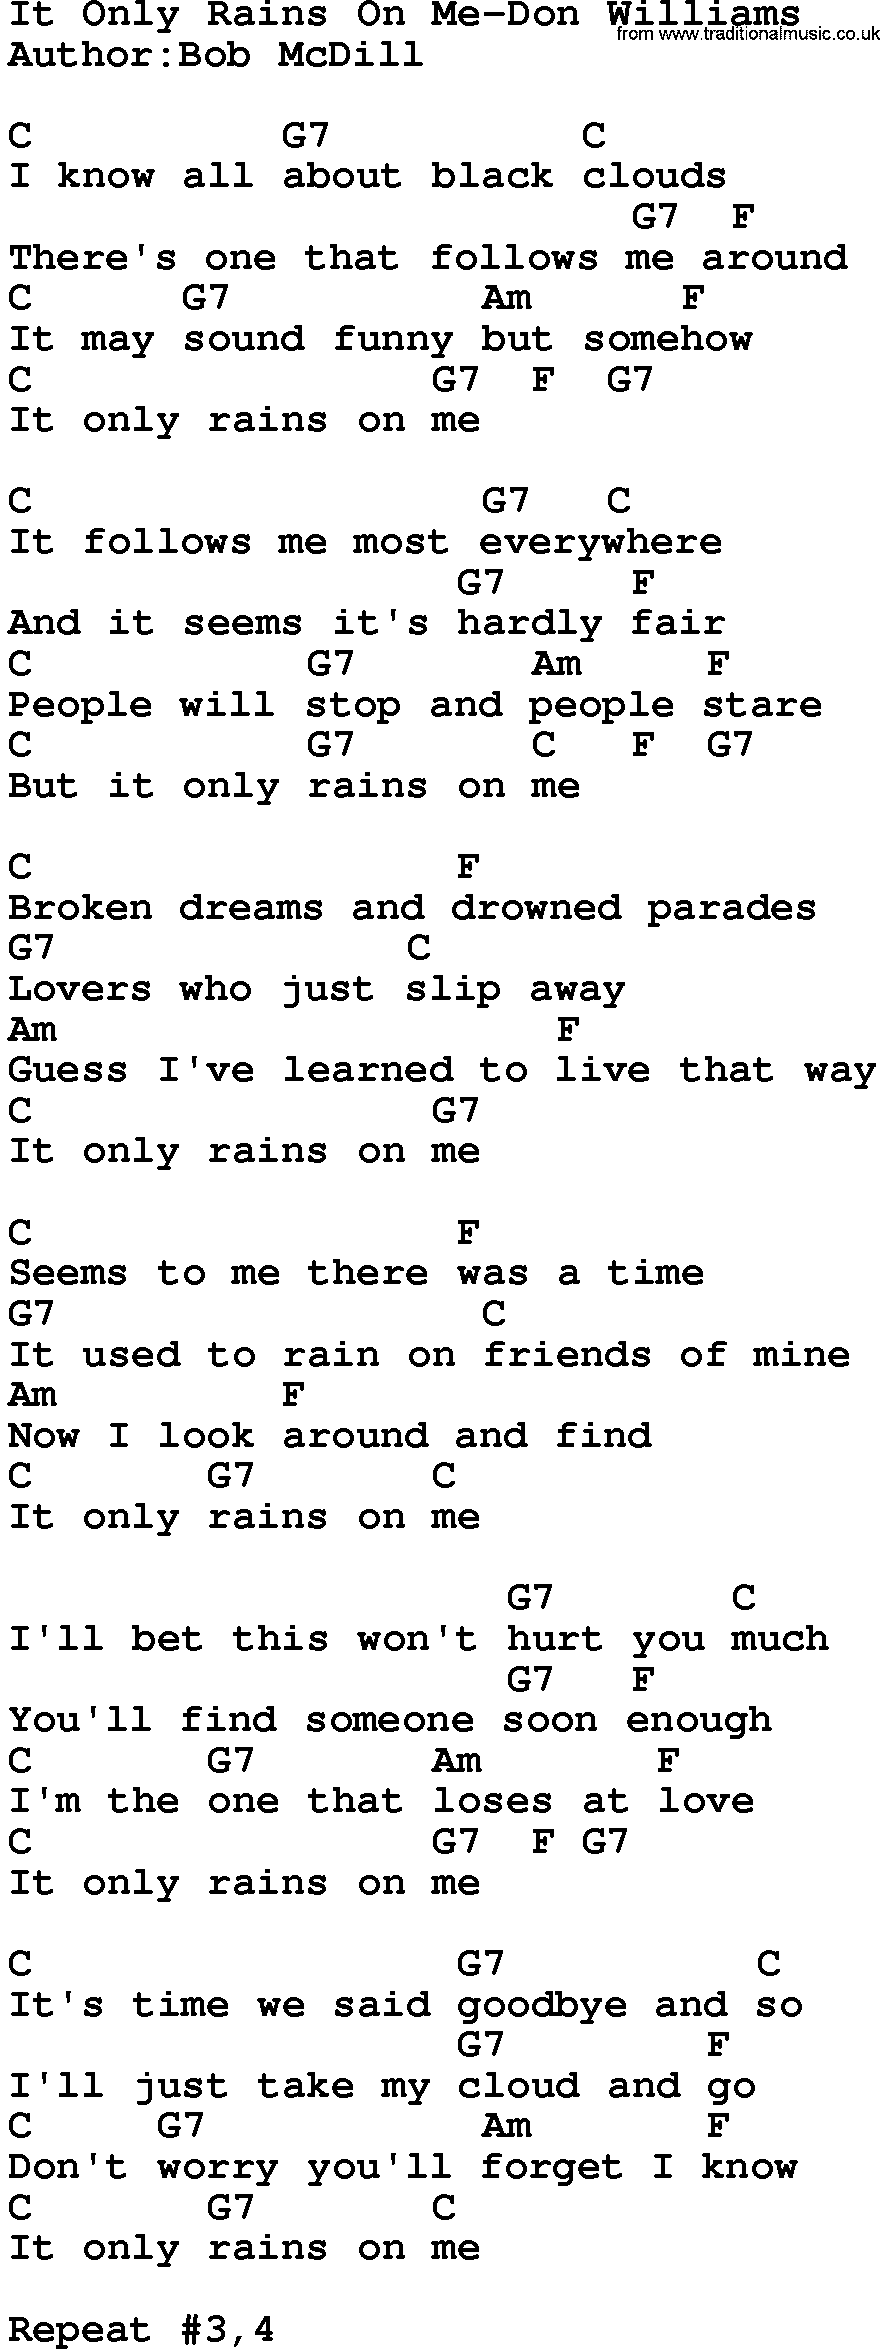 Country music song: It Only Rains On Me-Don Williams lyrics and chords